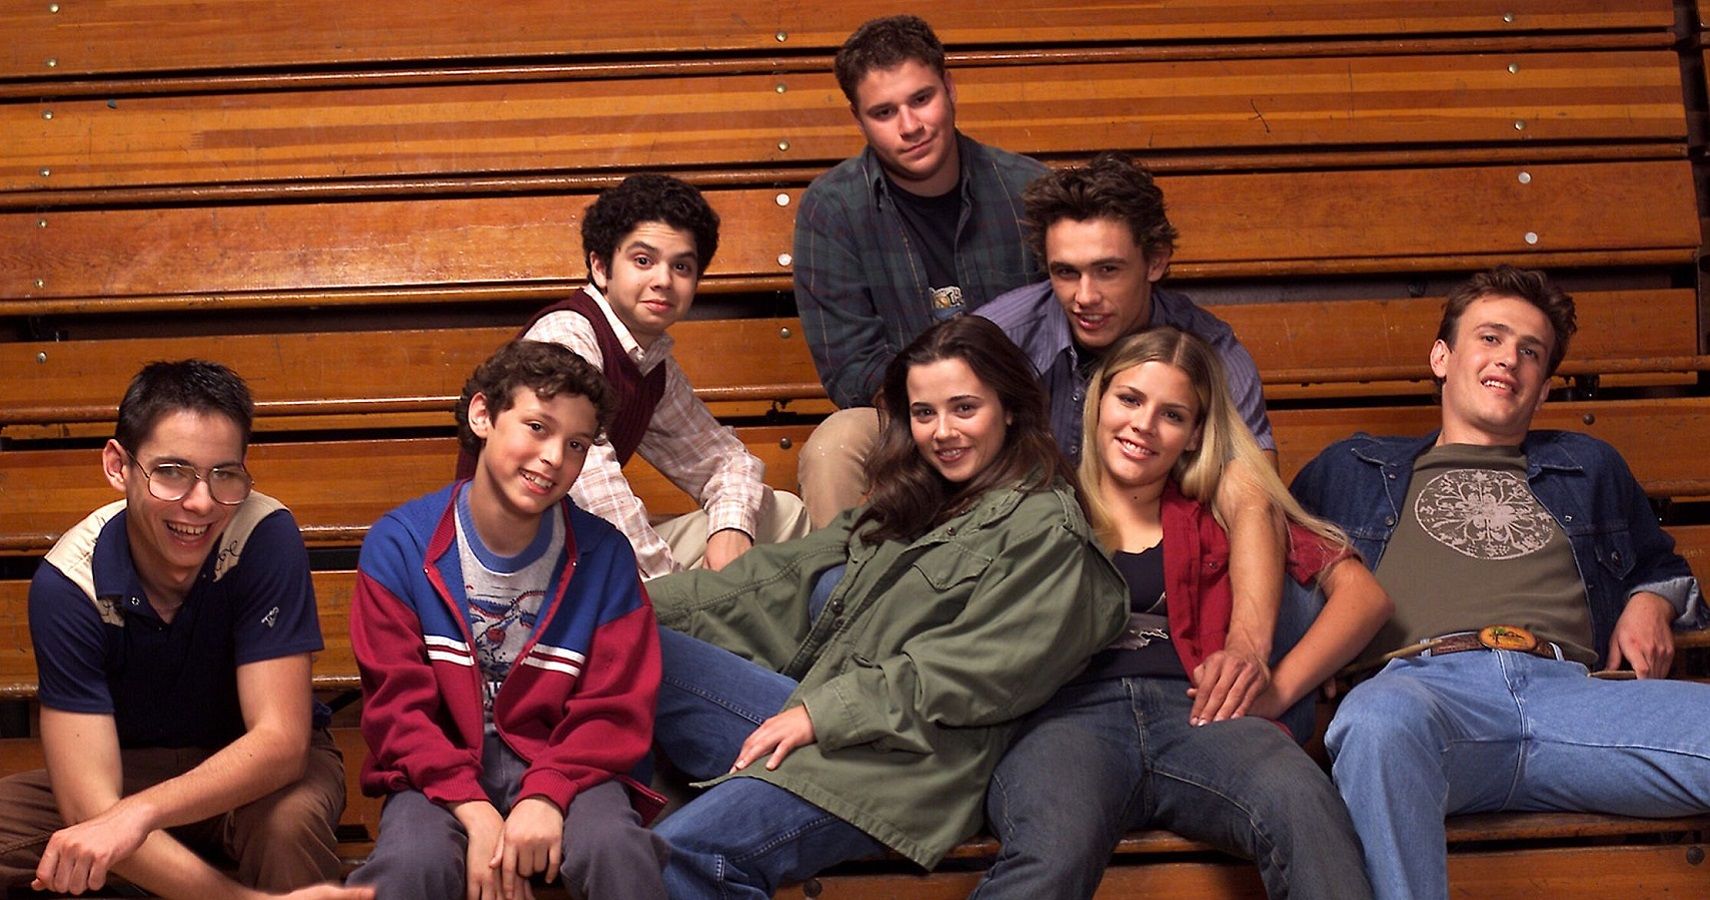 Which Freaks And Geeks Character Are You Based On Your Zodiac Sign